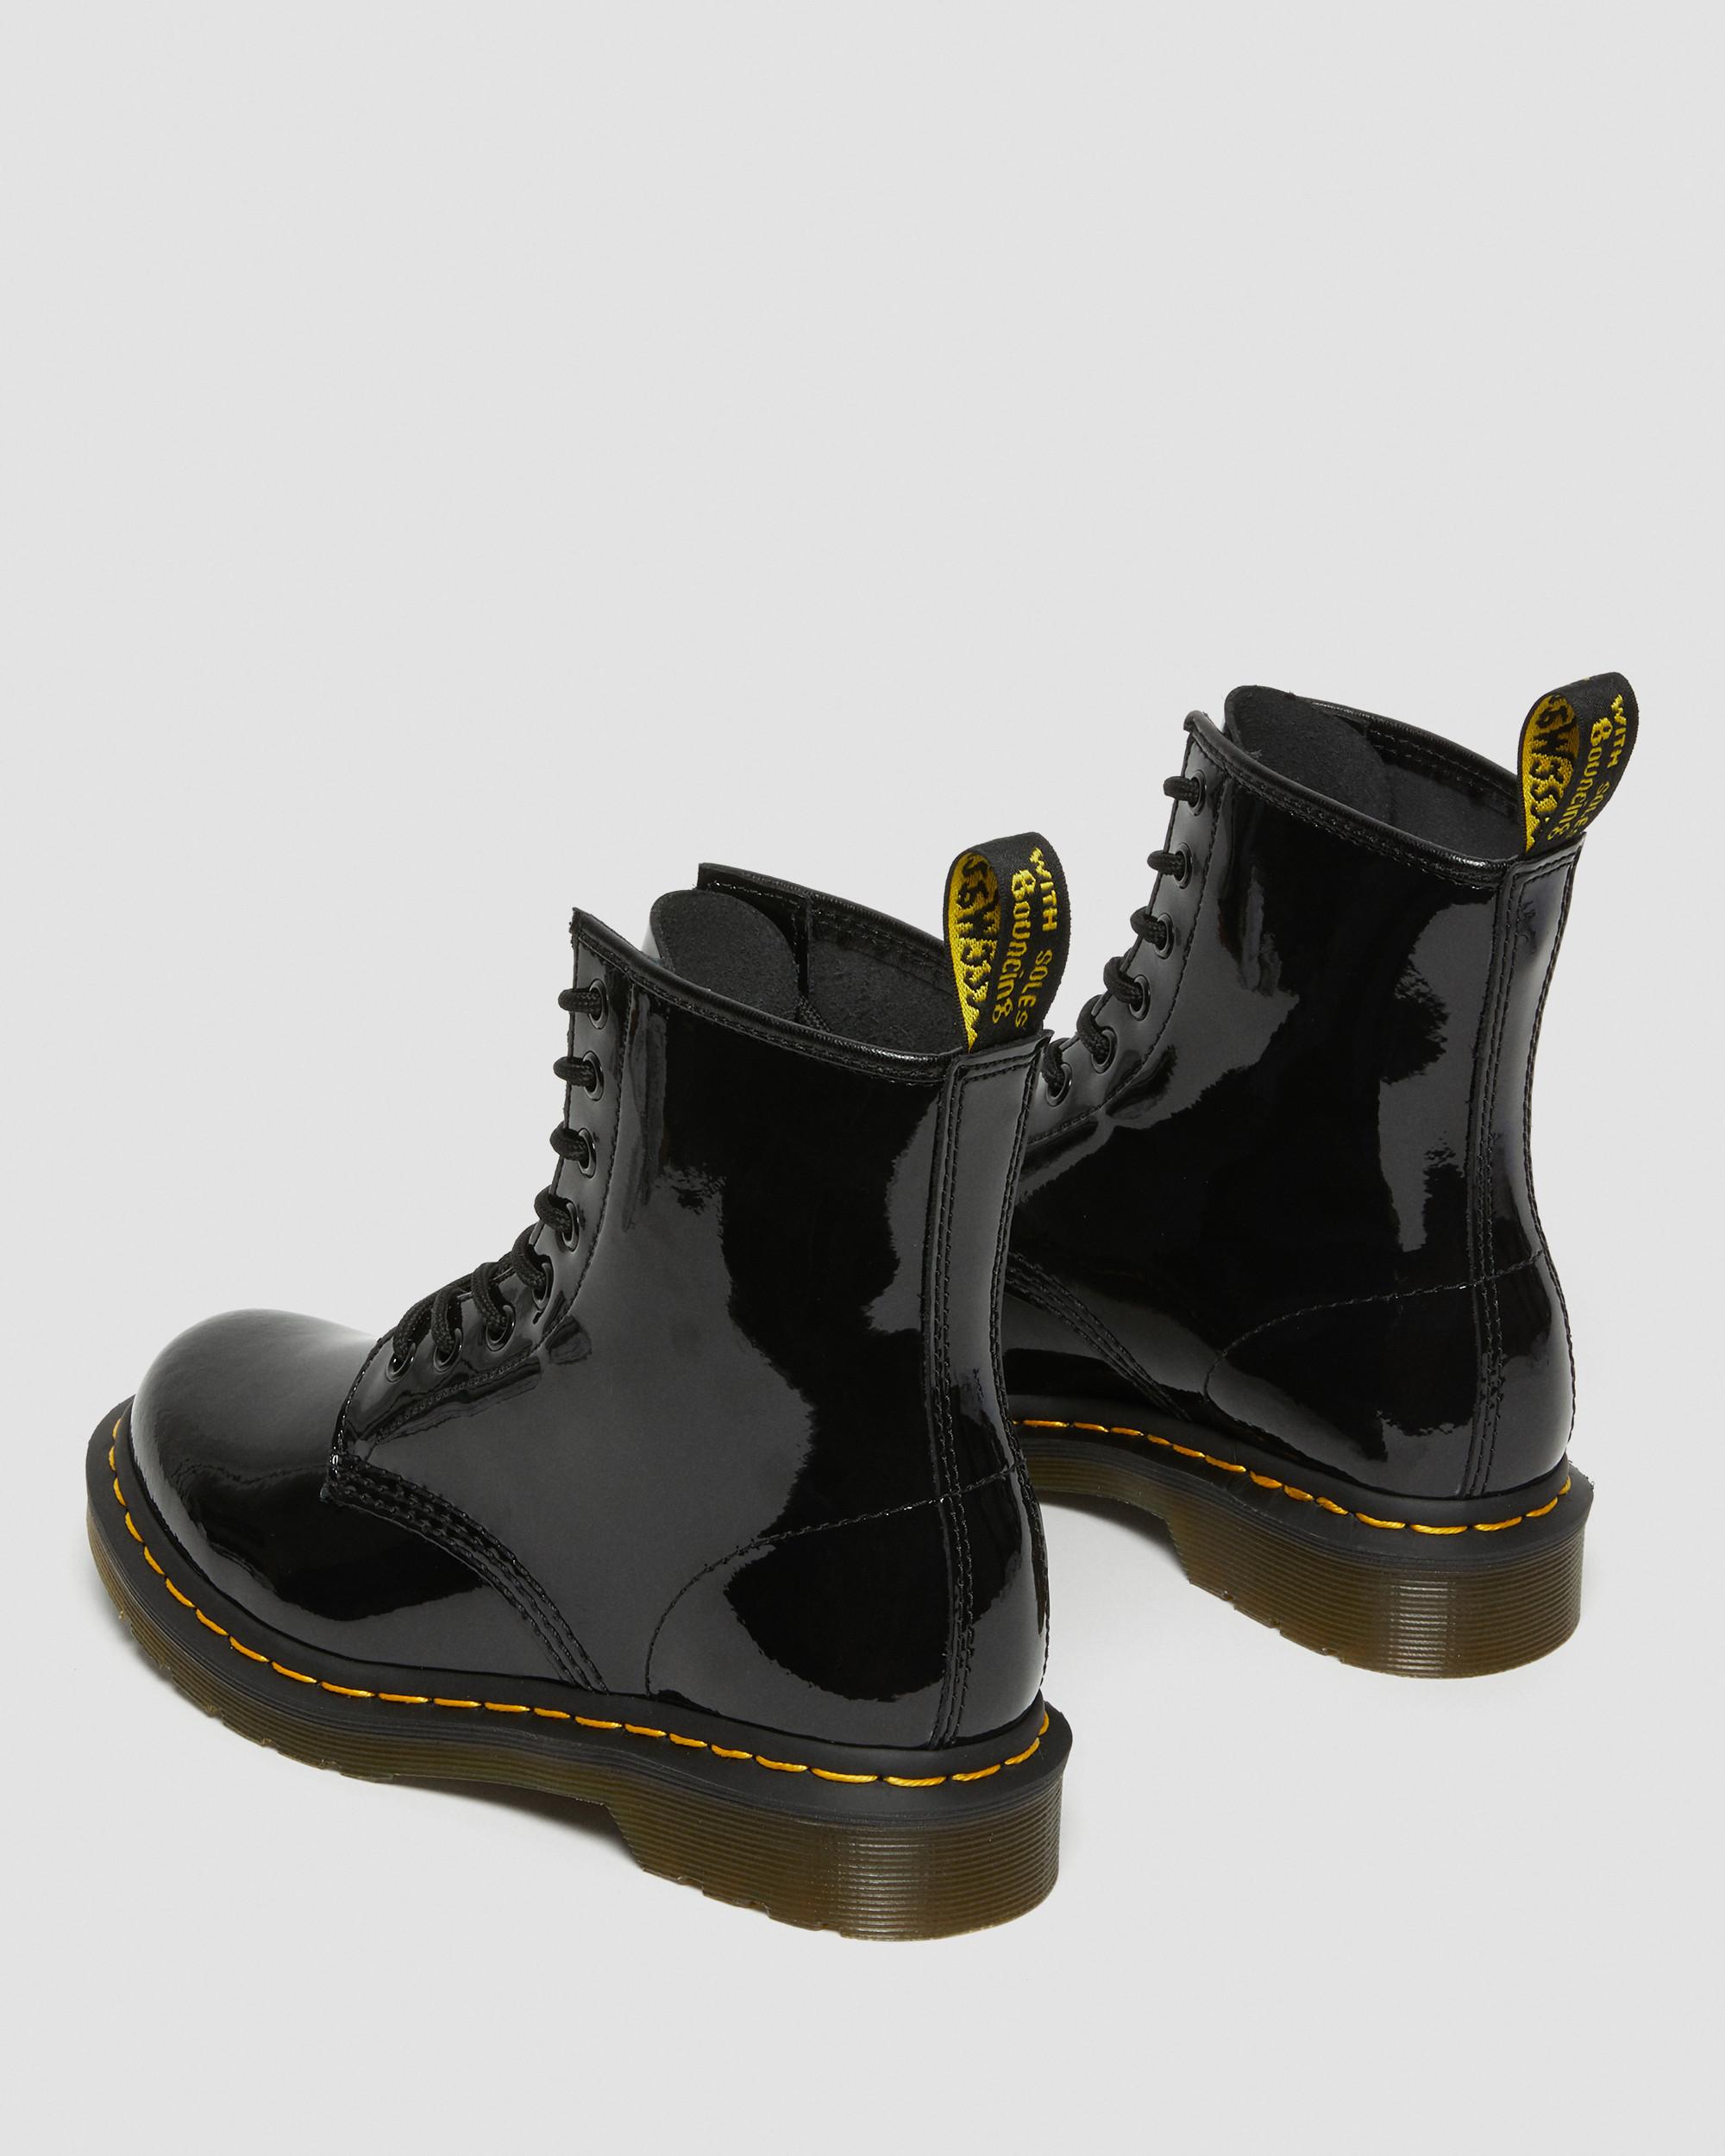 doc martens patent leather 146